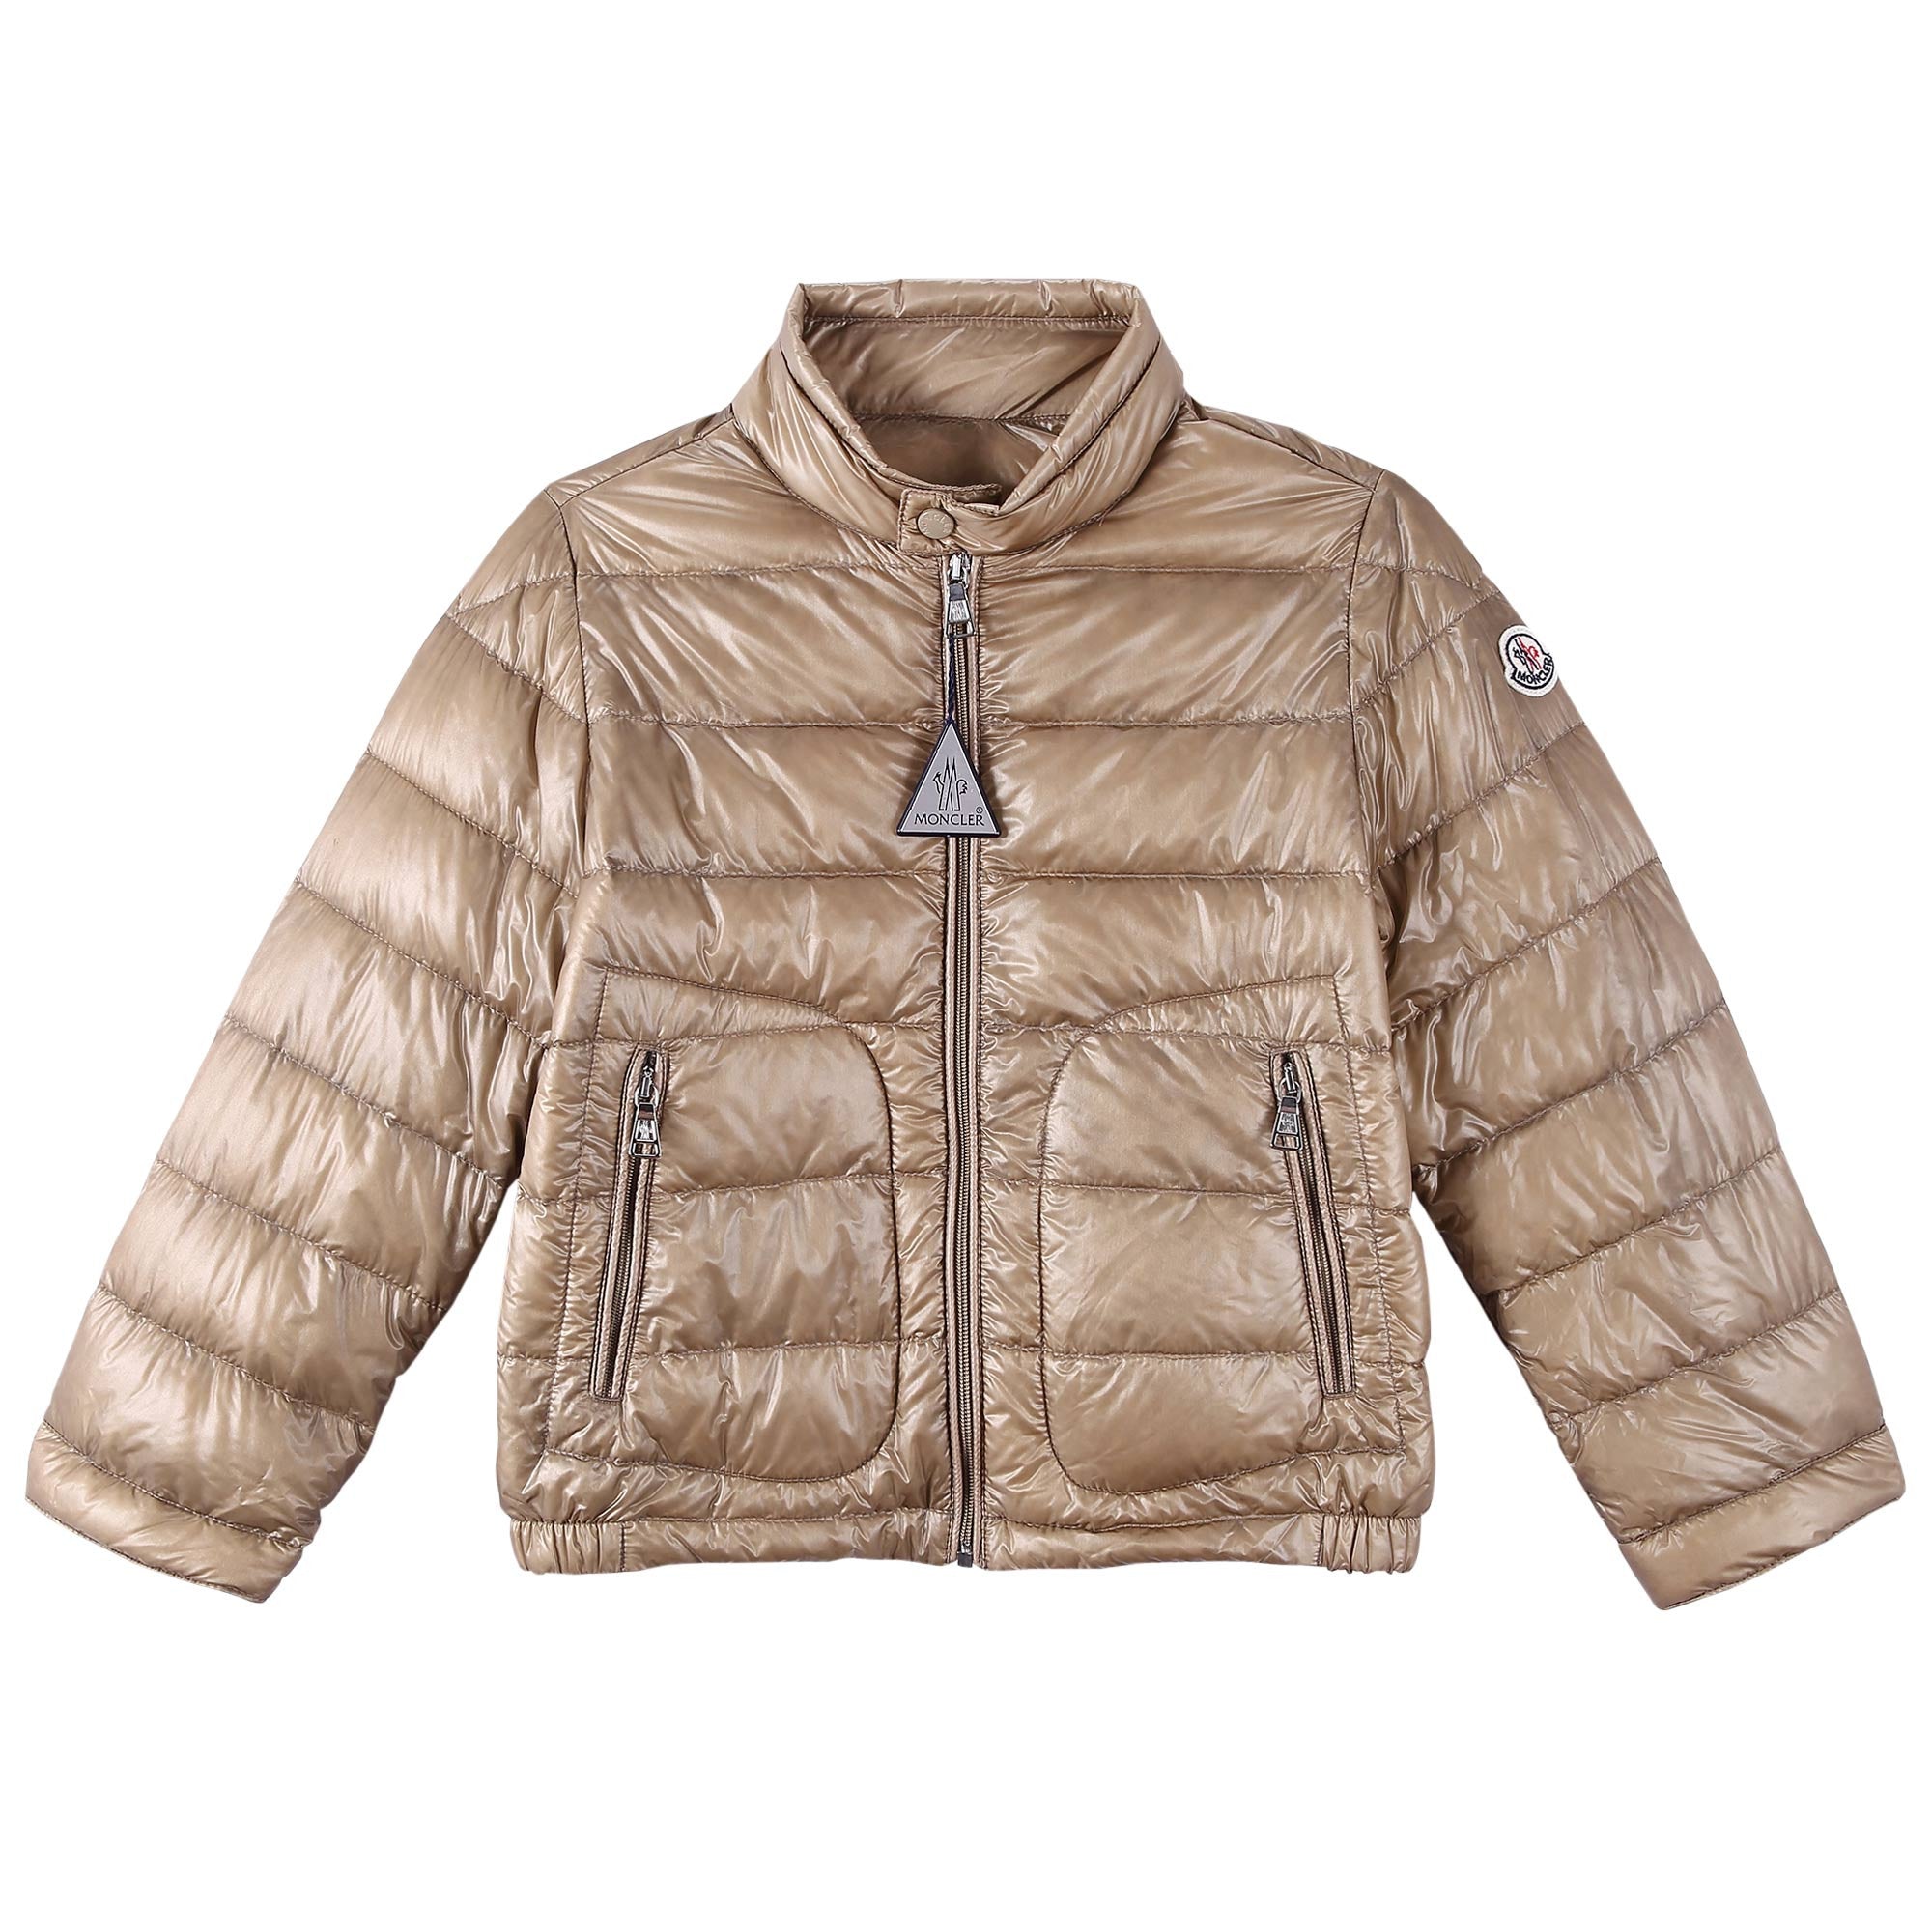 Boys Champagne Down Padded 'Acrous' Jacket With Hidden Pocket - CÉMAROSE | Children's Fashion Store - 1